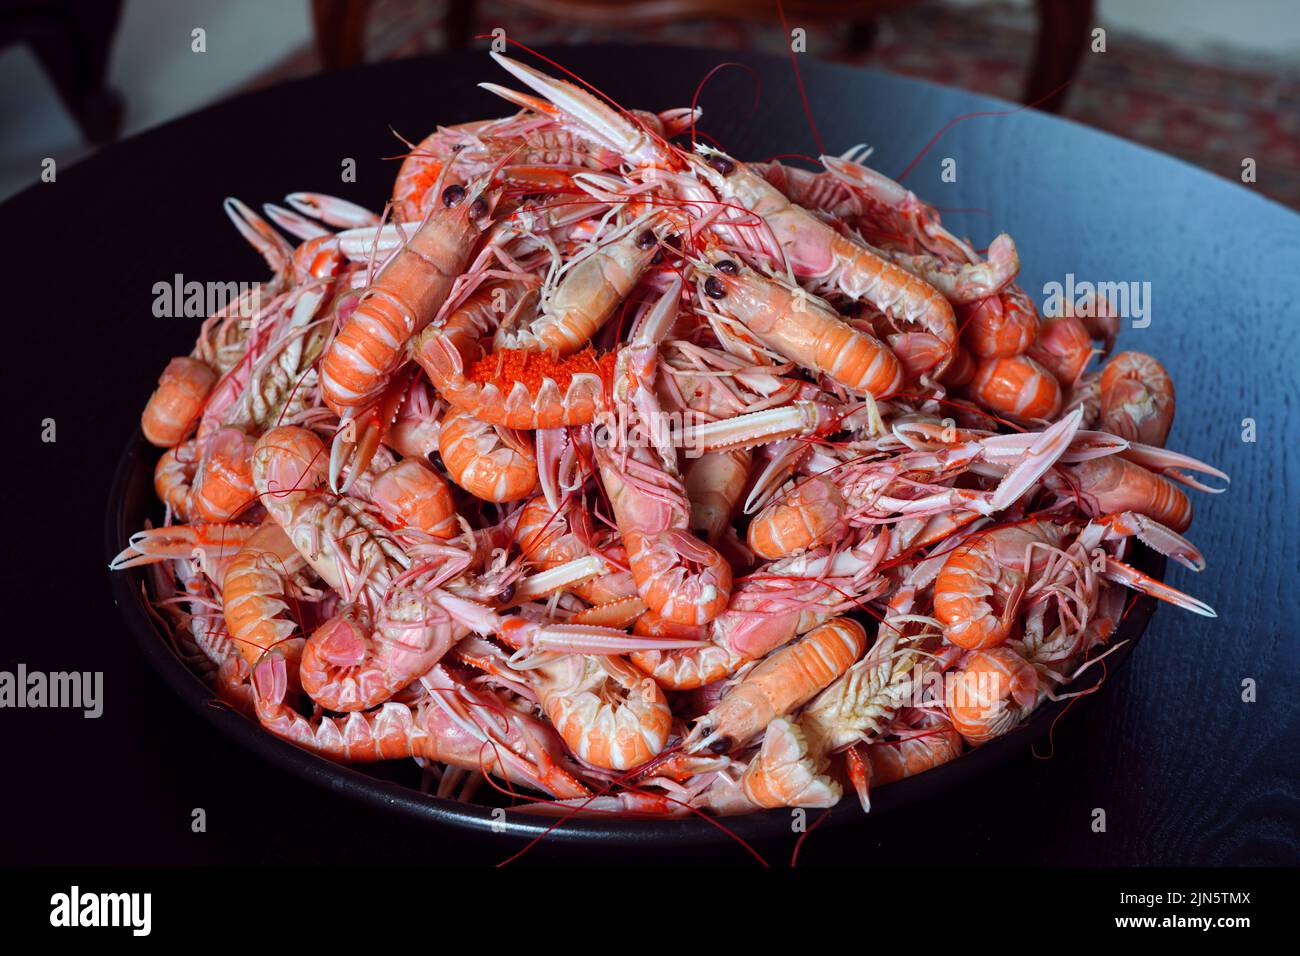 Platter of fresh cooked langostino in Brittany, France Stock Photo